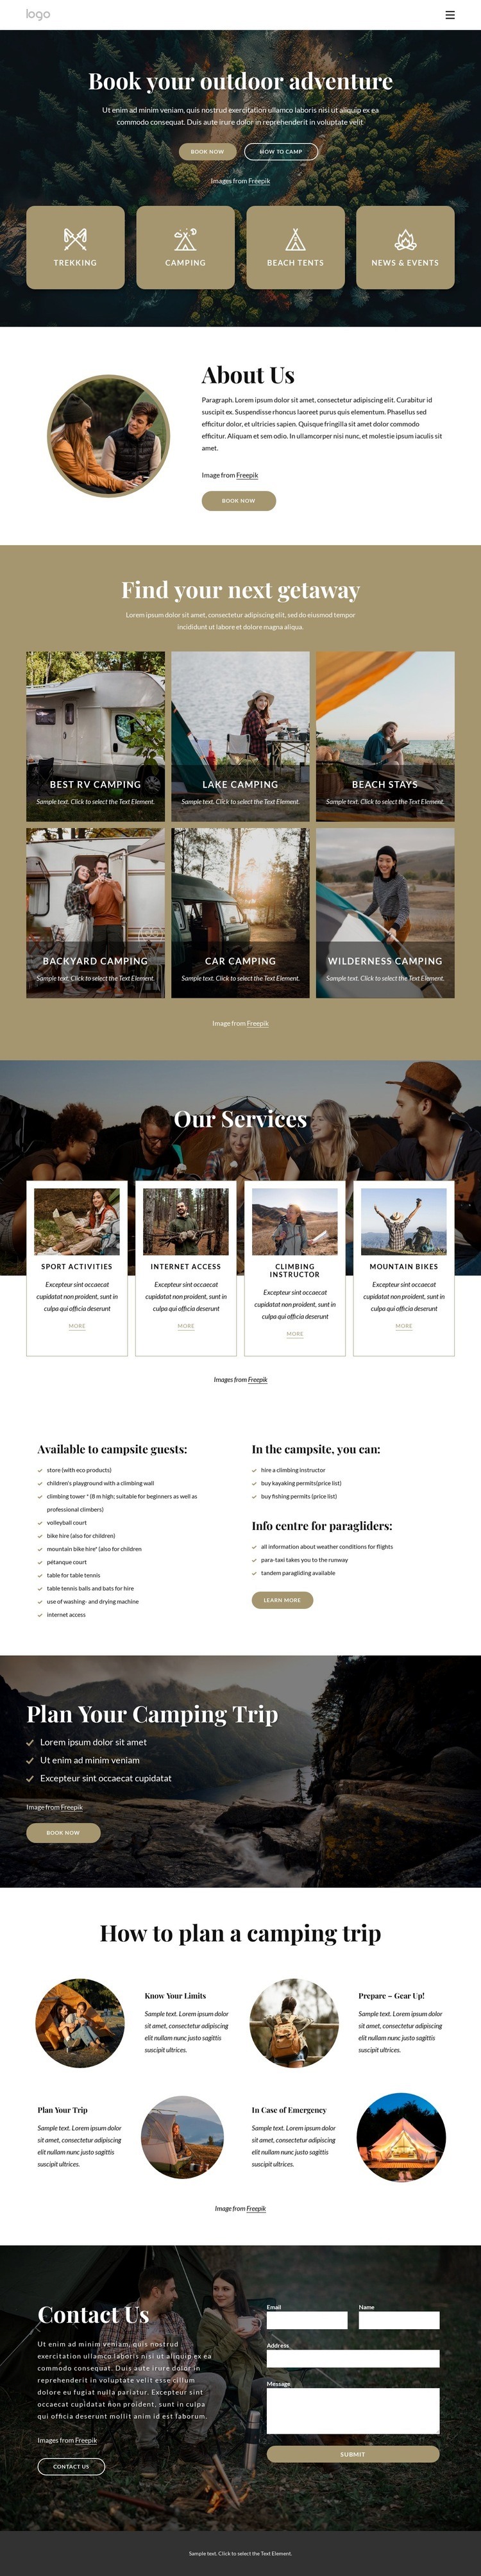 Book your outdoor adventure Web Page Design